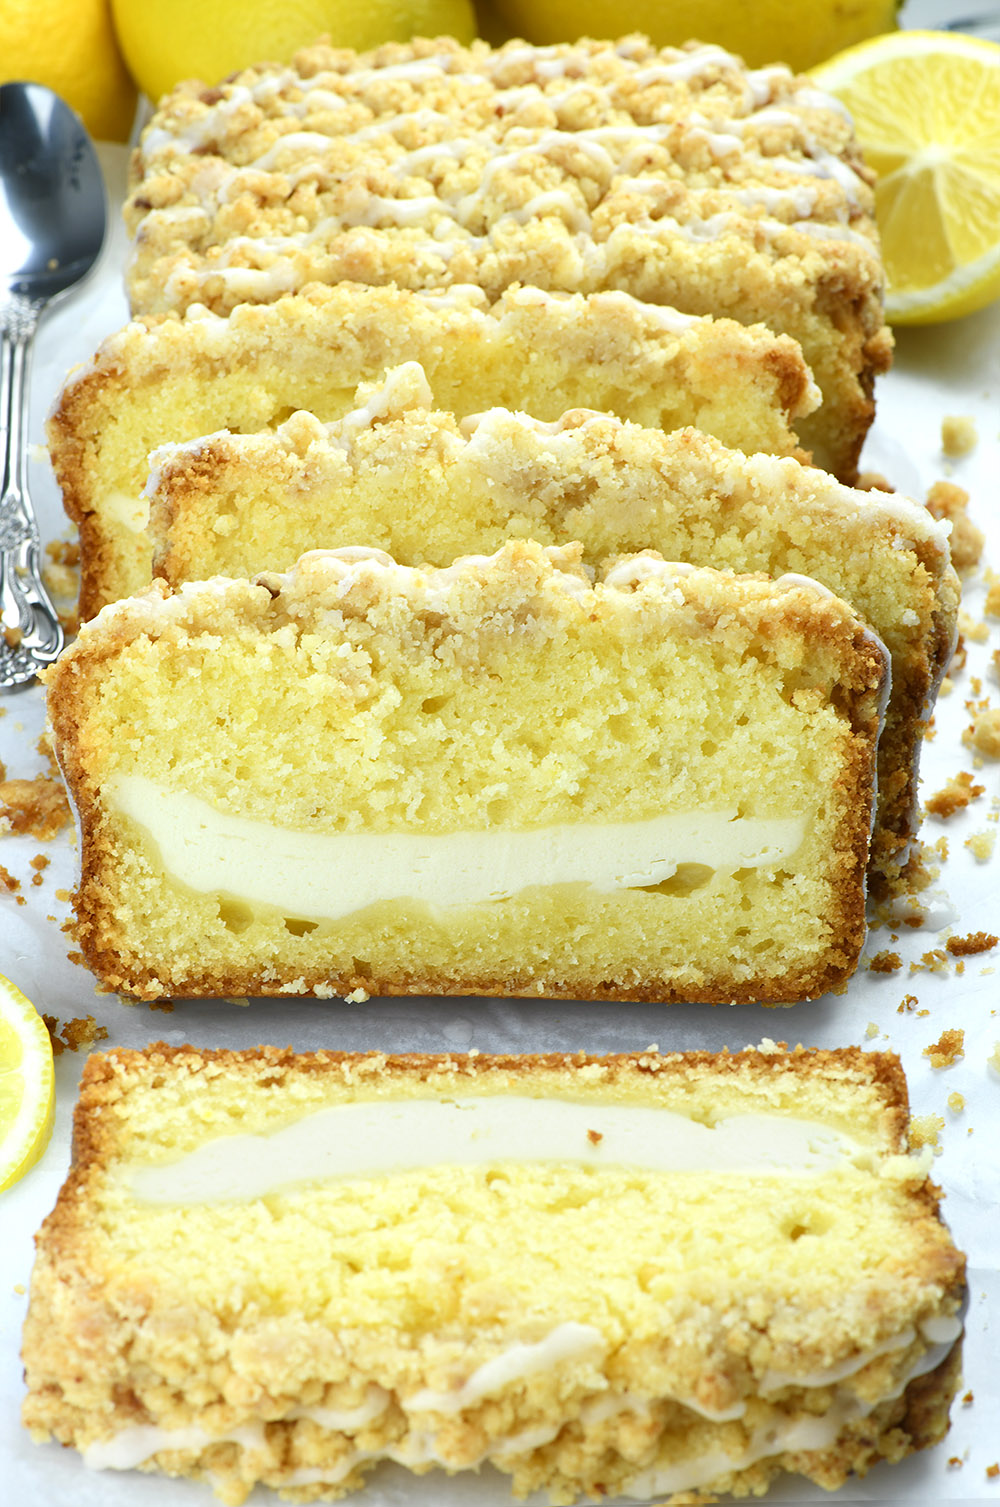 Lemon Pound Cake with cream cheese filling couple of slices on white paper.